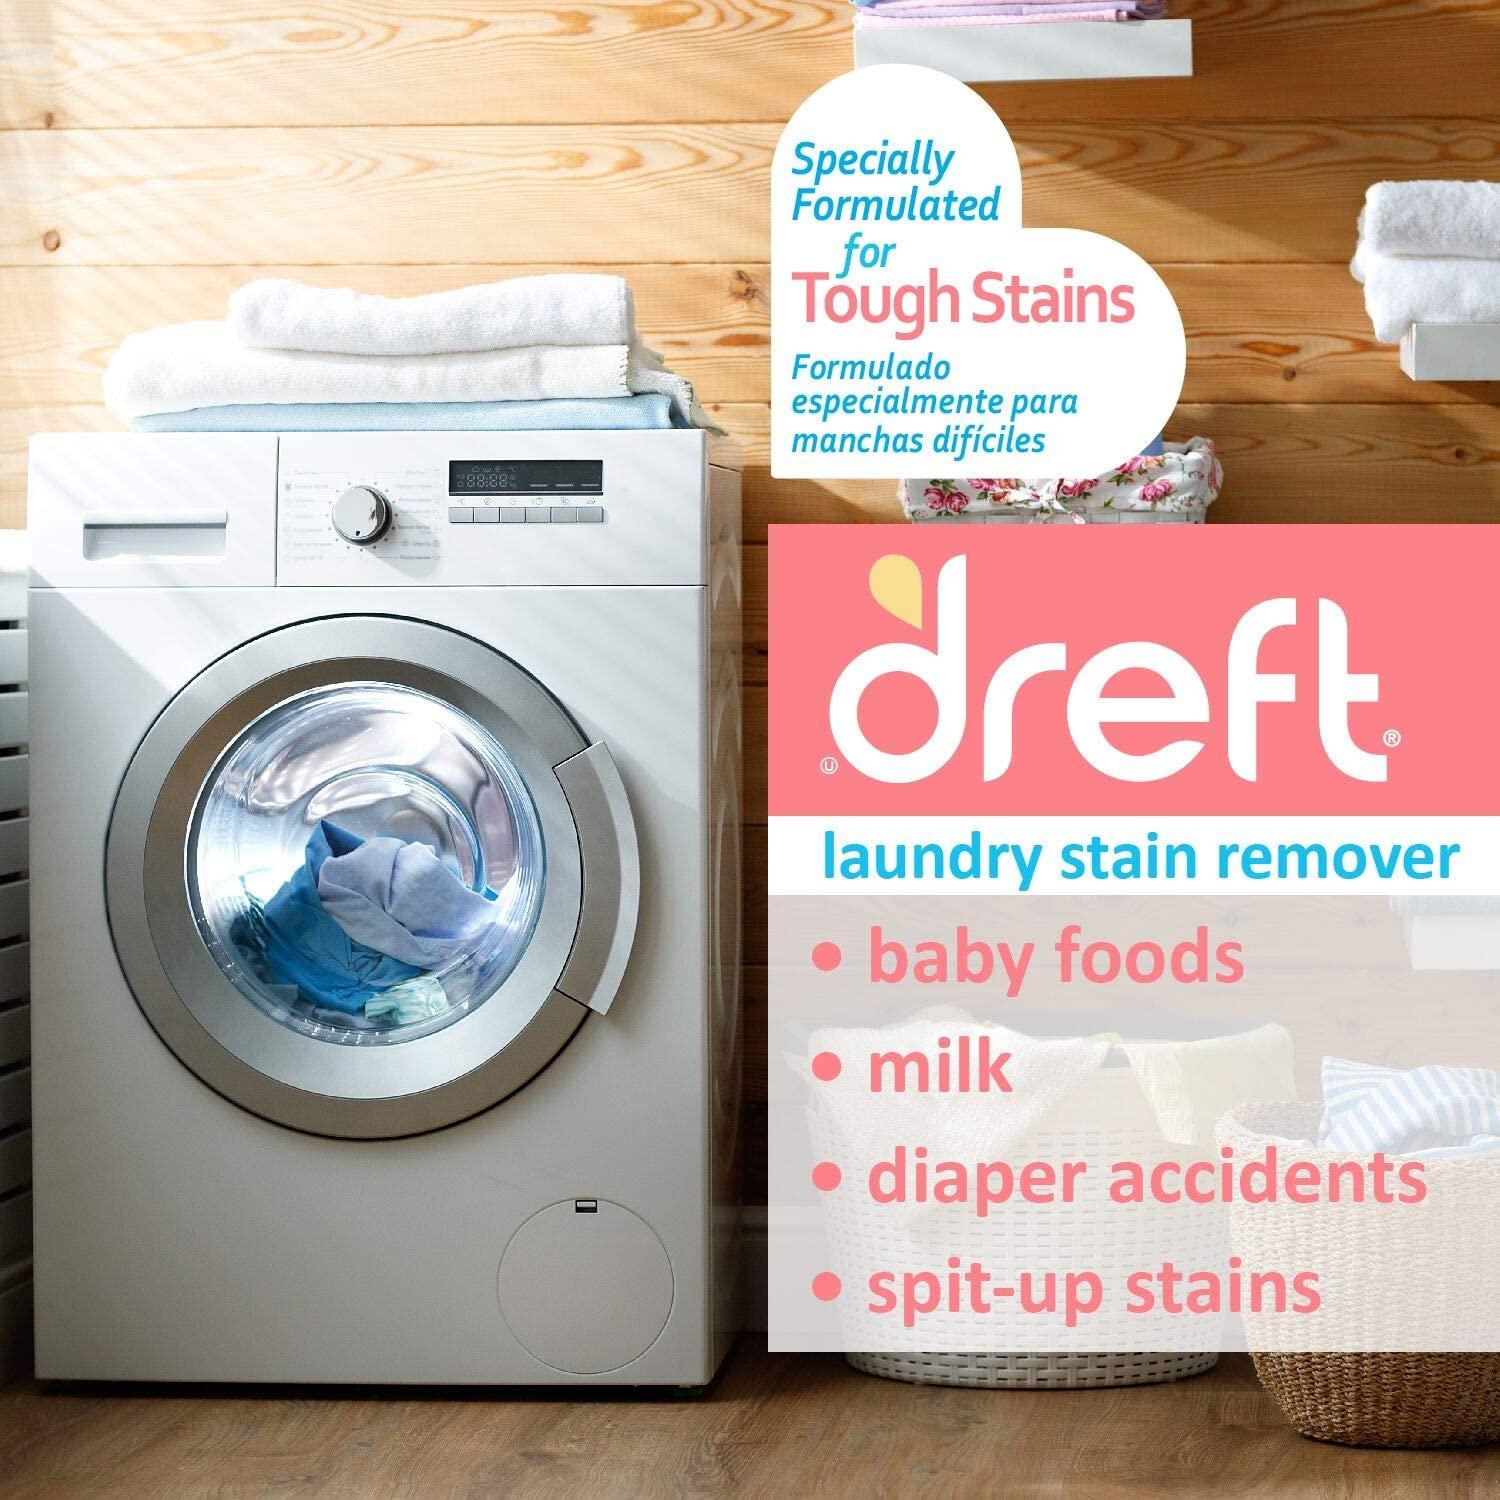 Dreft Laundry Stain Remover